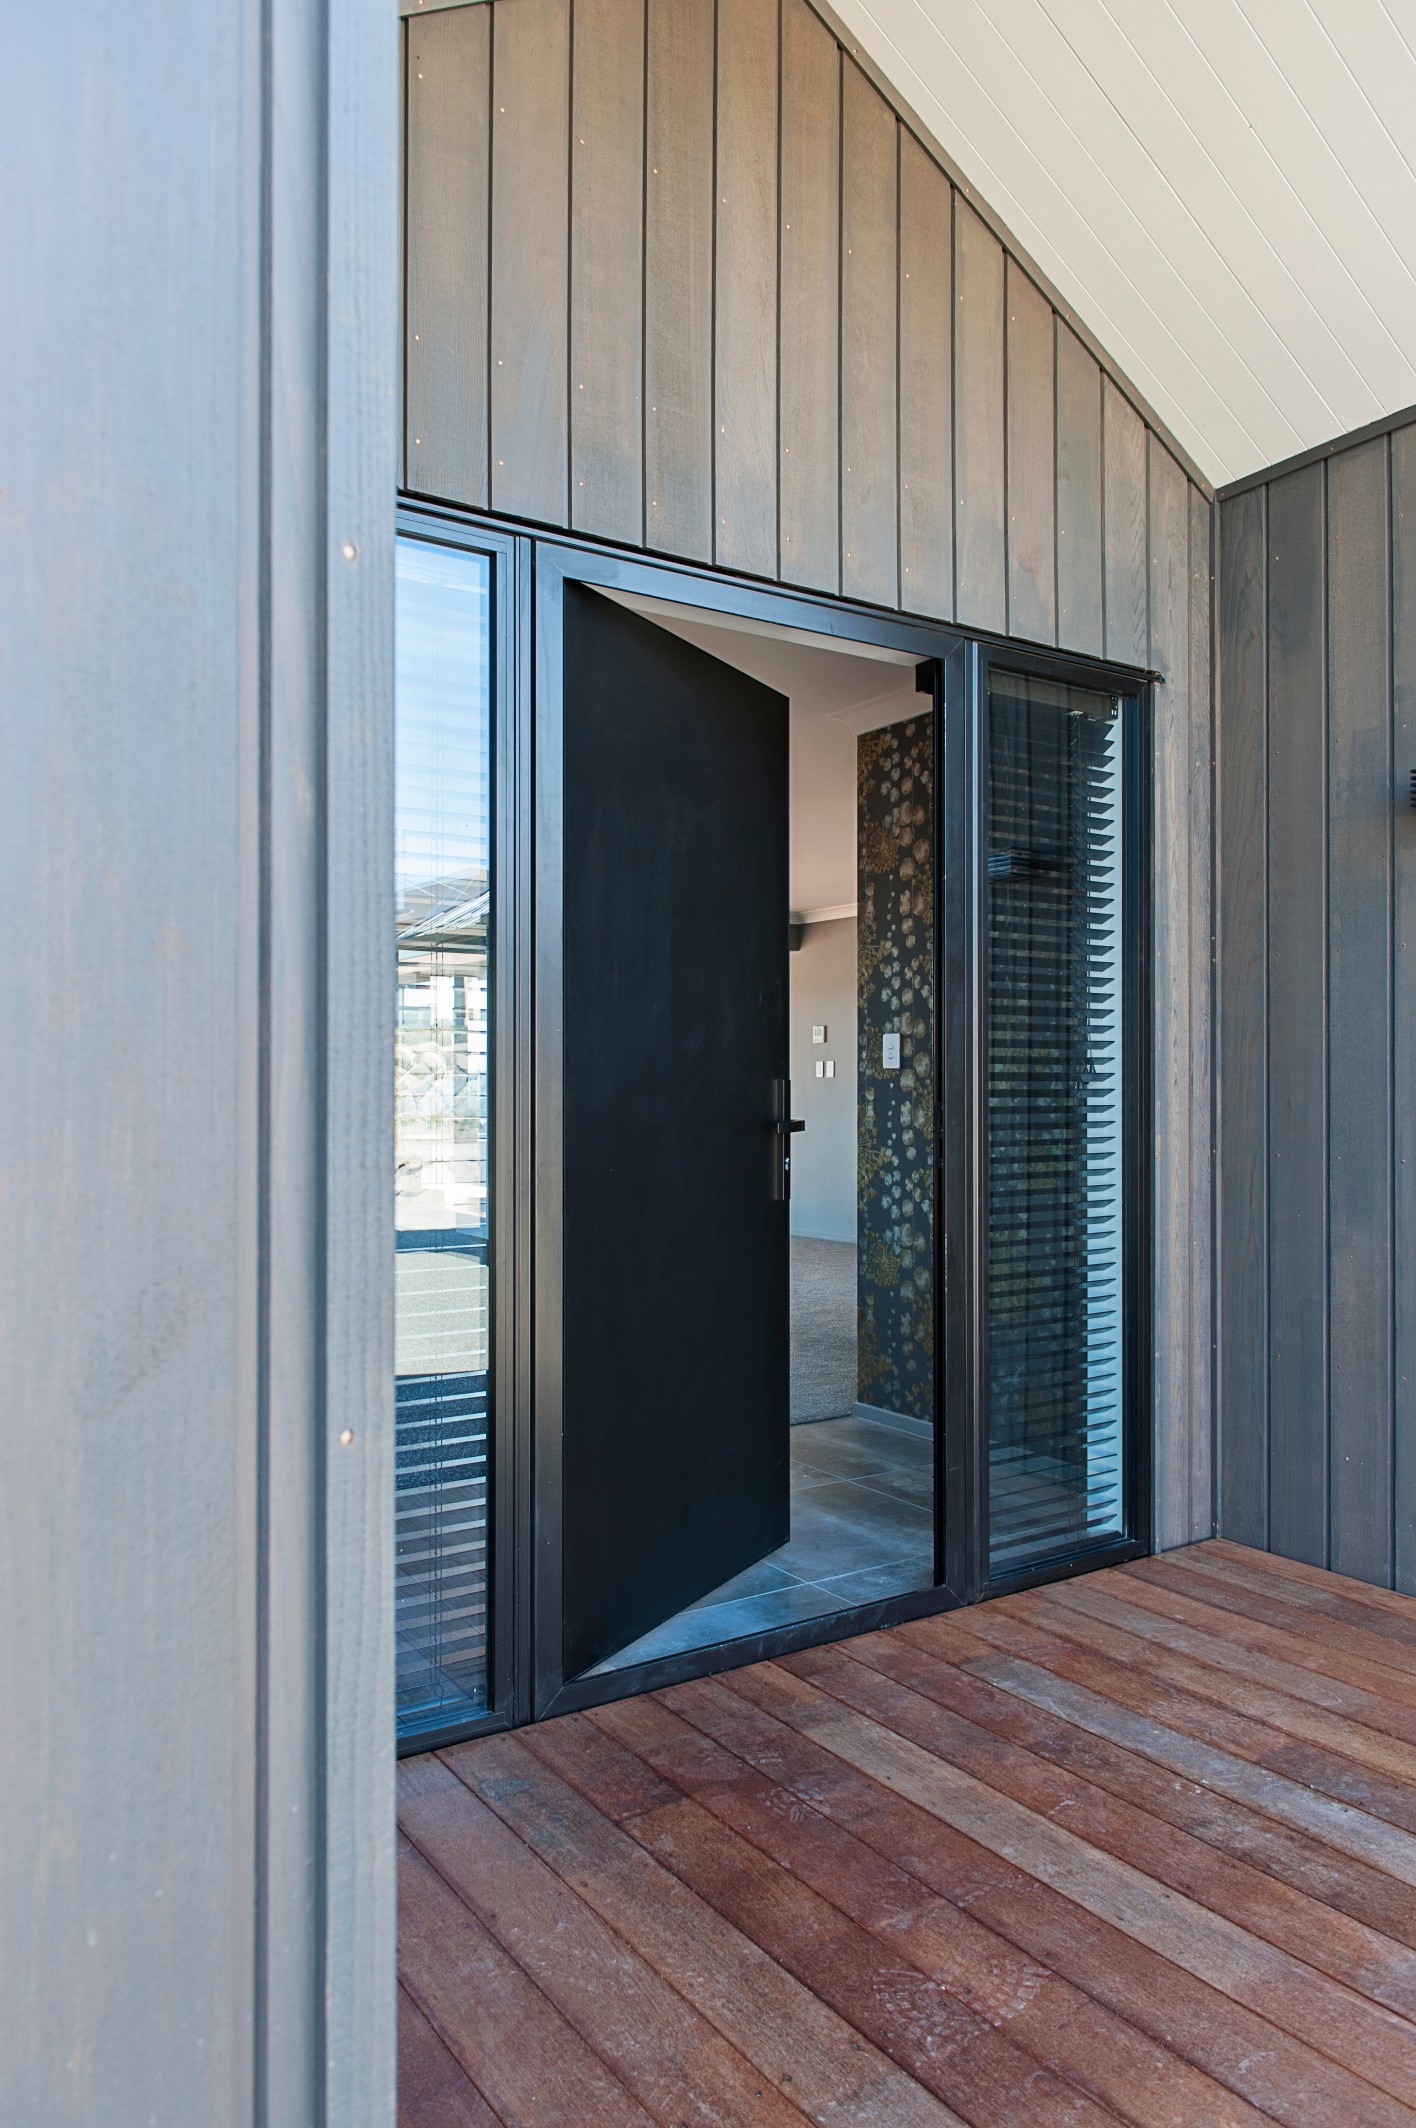  Feature cedar cladding provide a warm welcome to the front door